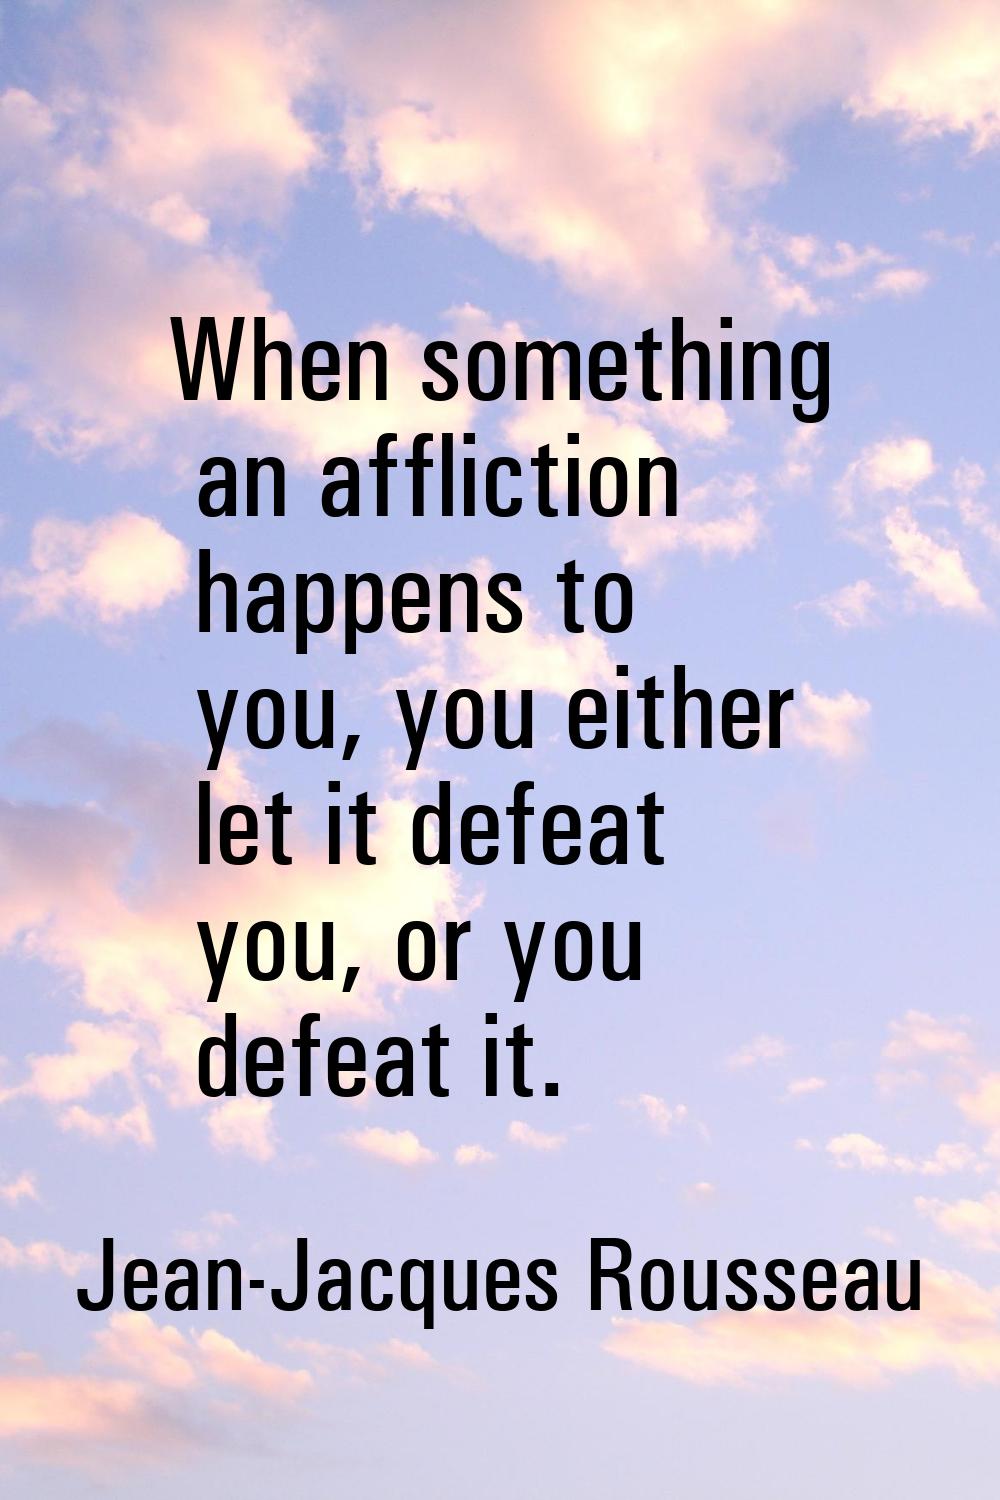 When something an affliction happens to you, you either let it defeat you, or you defeat it.